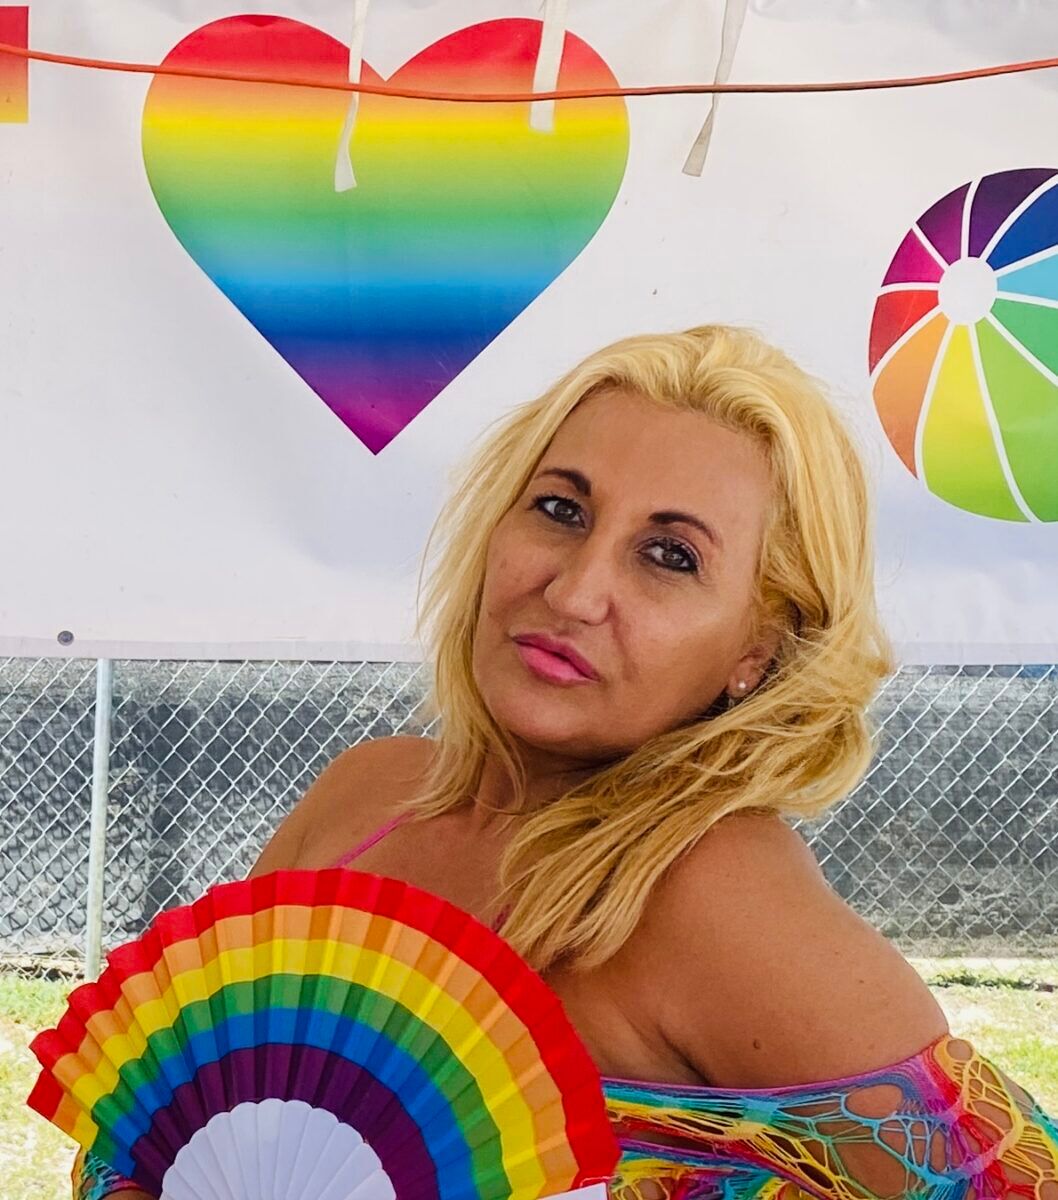 Local personality Frenchie tending bar at the Miami Beach Pride festival.